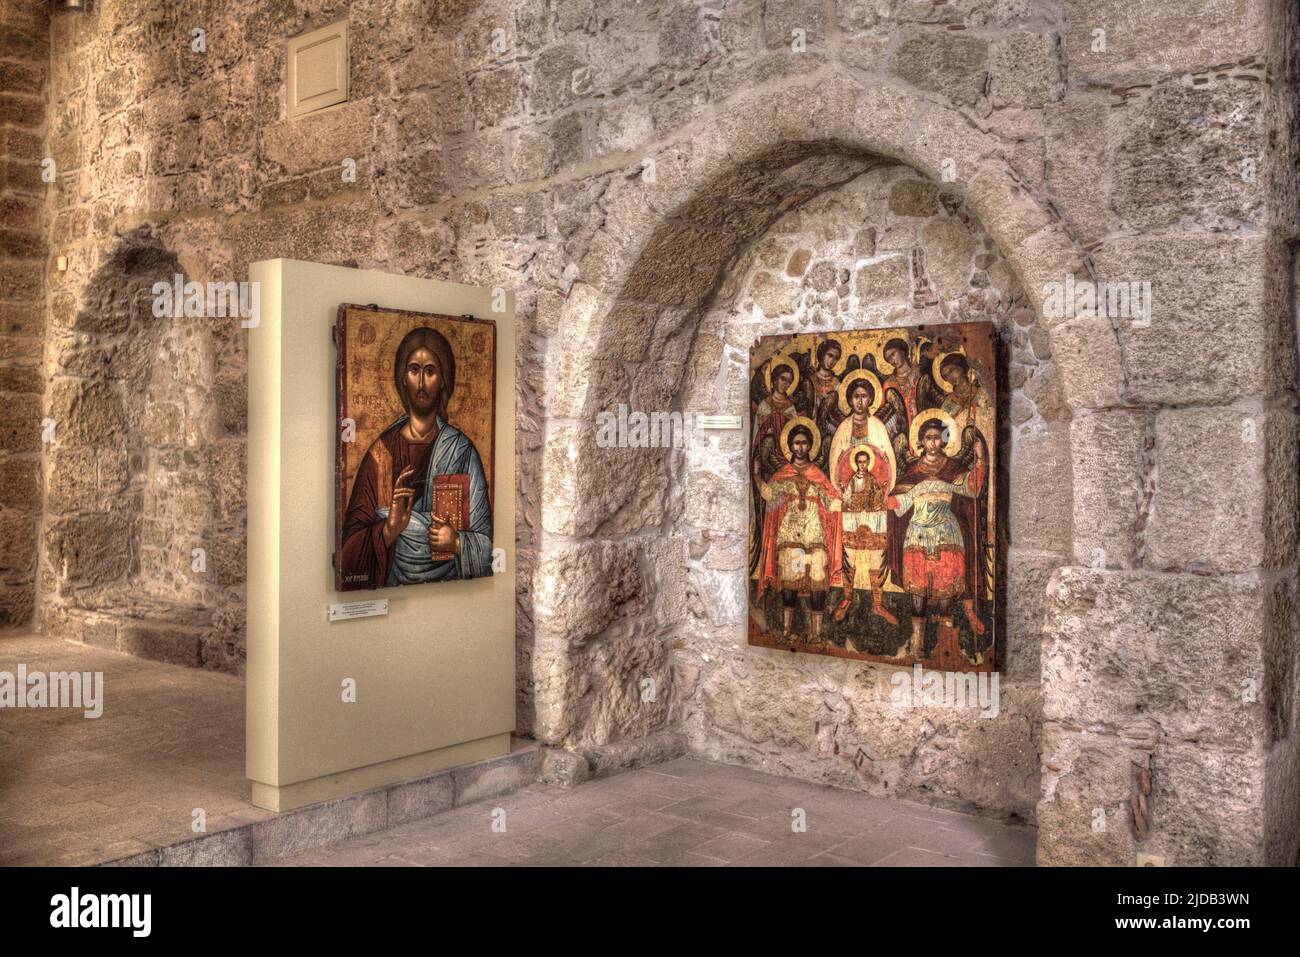 Religious paintings, icons, at Our Lady of the Castle Church in the Byzantine Art Museum (Palace of the Grand Master of the Knights of Rhodes) in R... Stock Photo